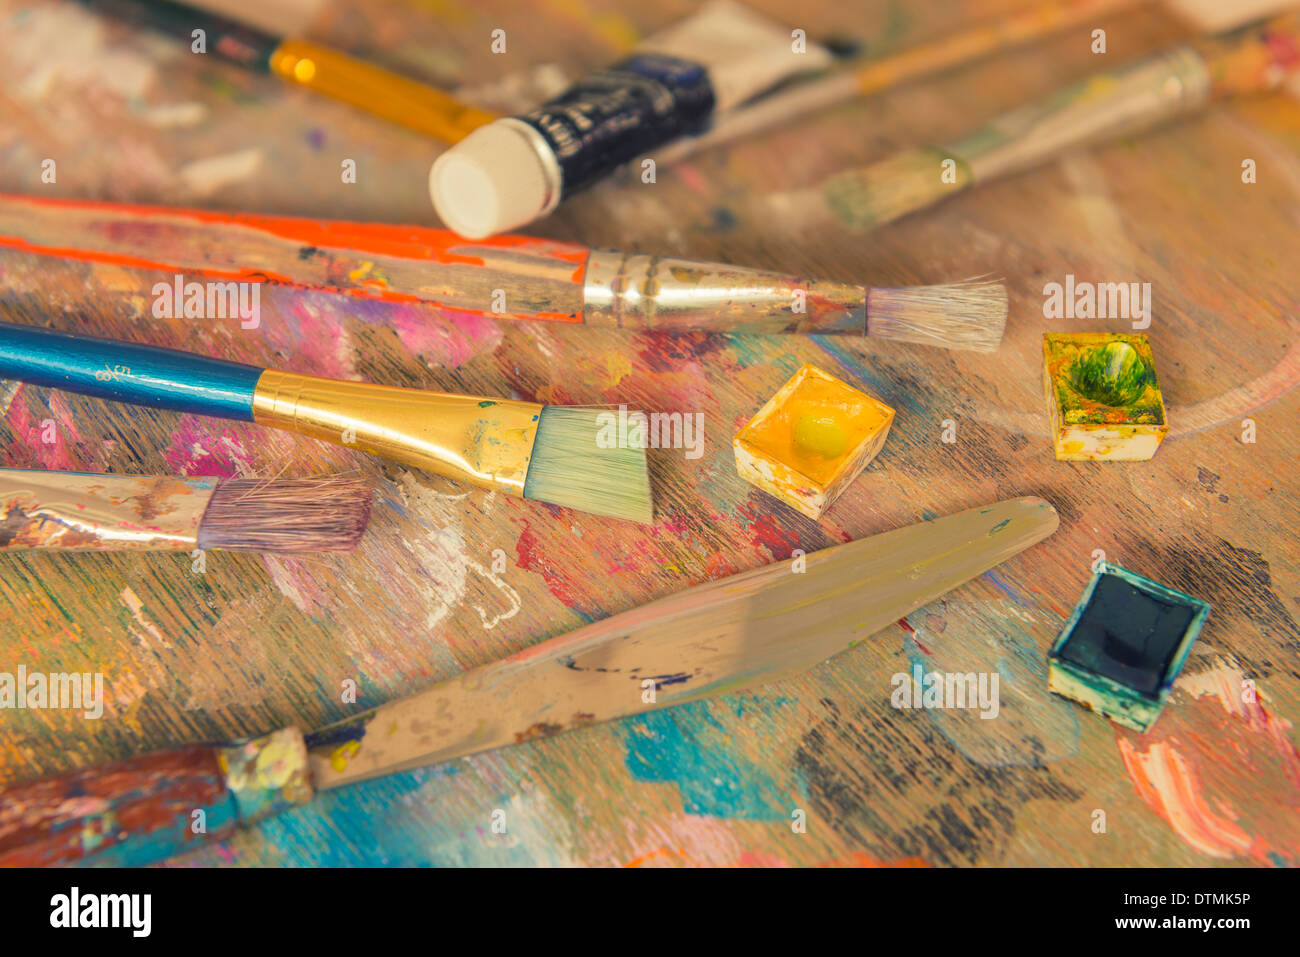 A small collection of art material on a wooden palette Stock Photo